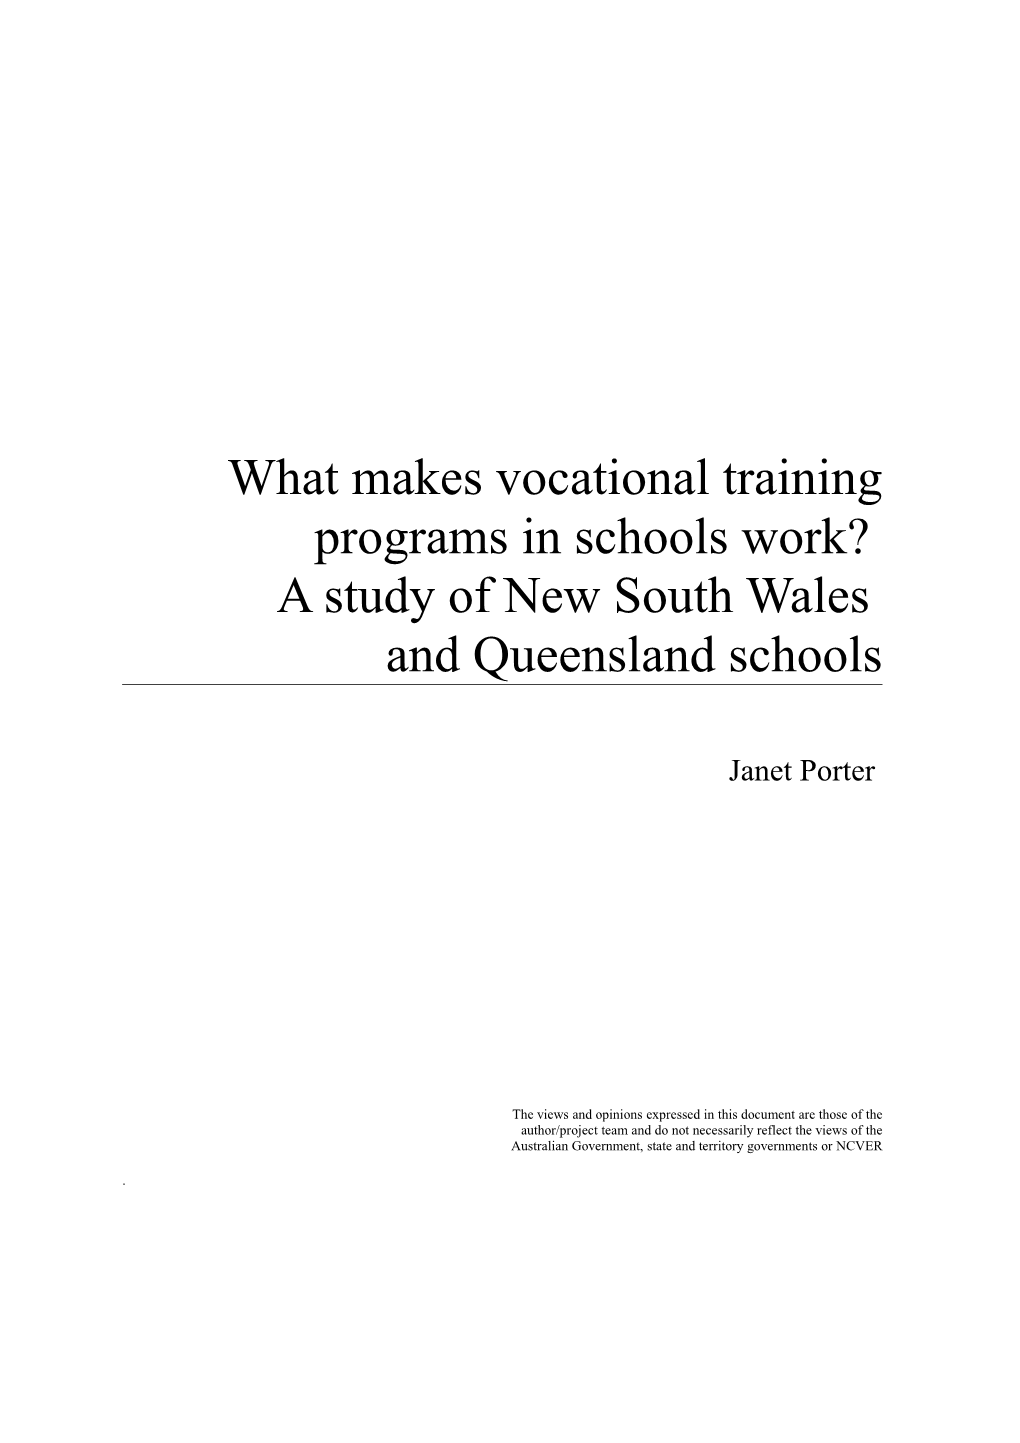 What Makes Vocational Training Programs in Schools Work? a Study of New South Wales And